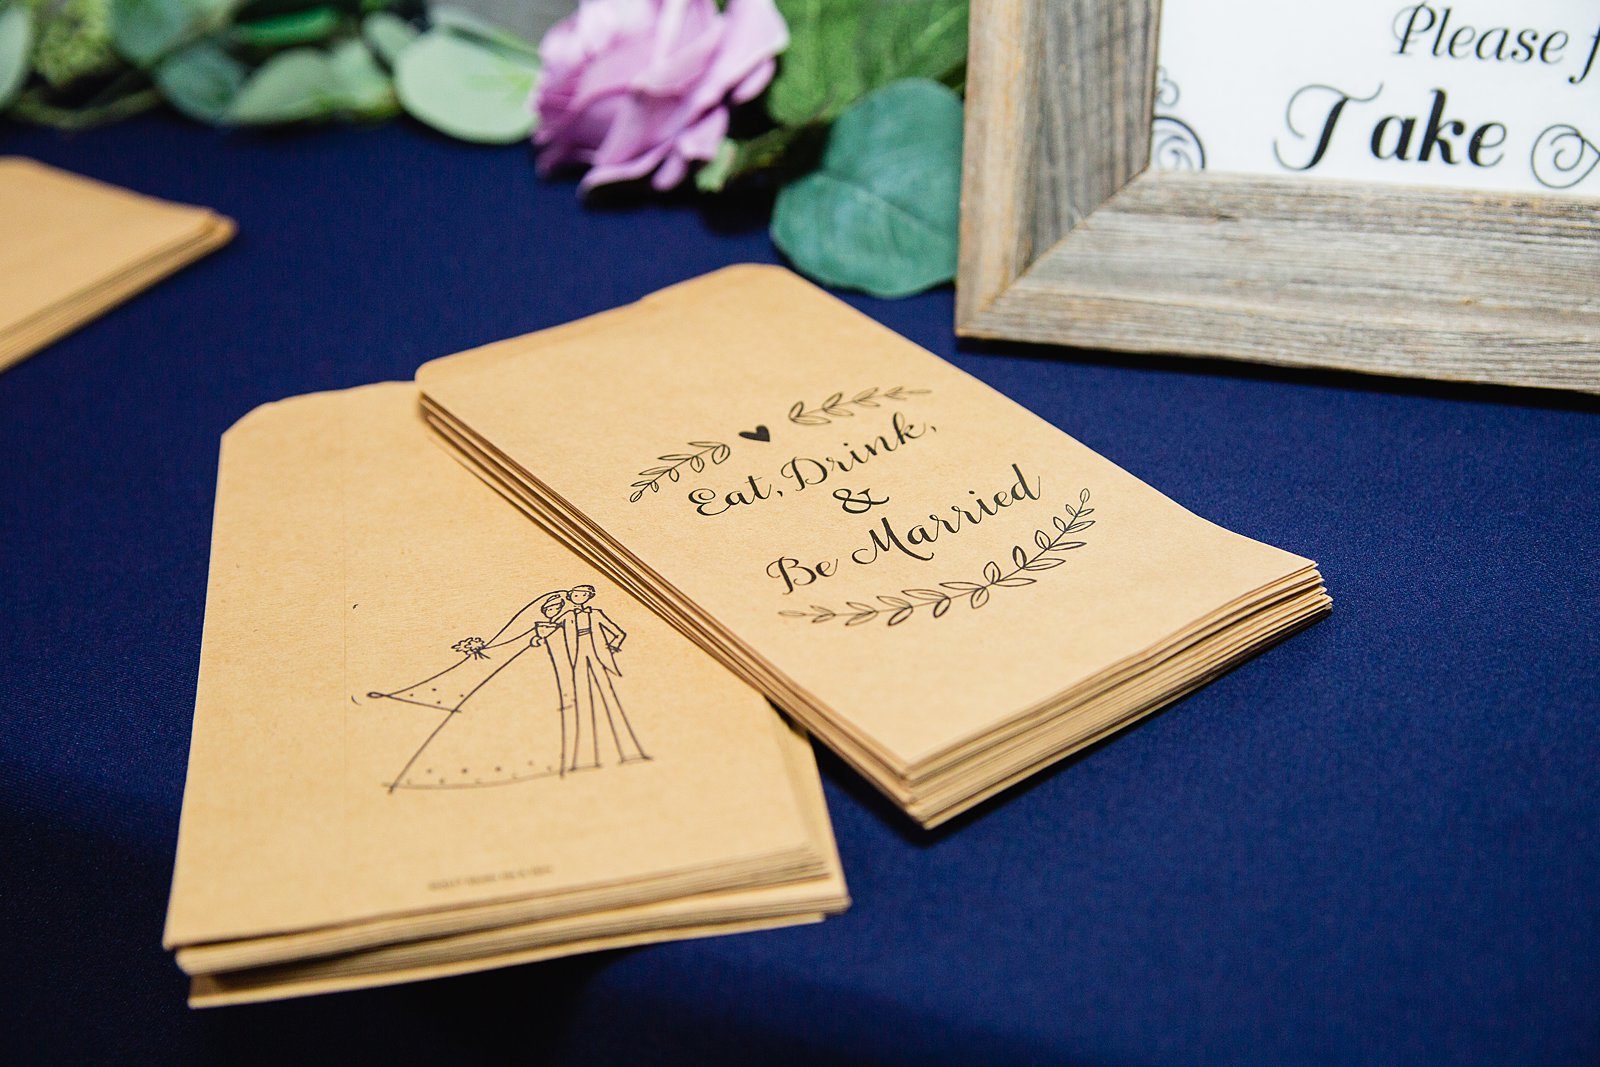 Eat, Drink, & Be Married paper bags for guests to fill with a late night popcorn snack by PMA Photography.